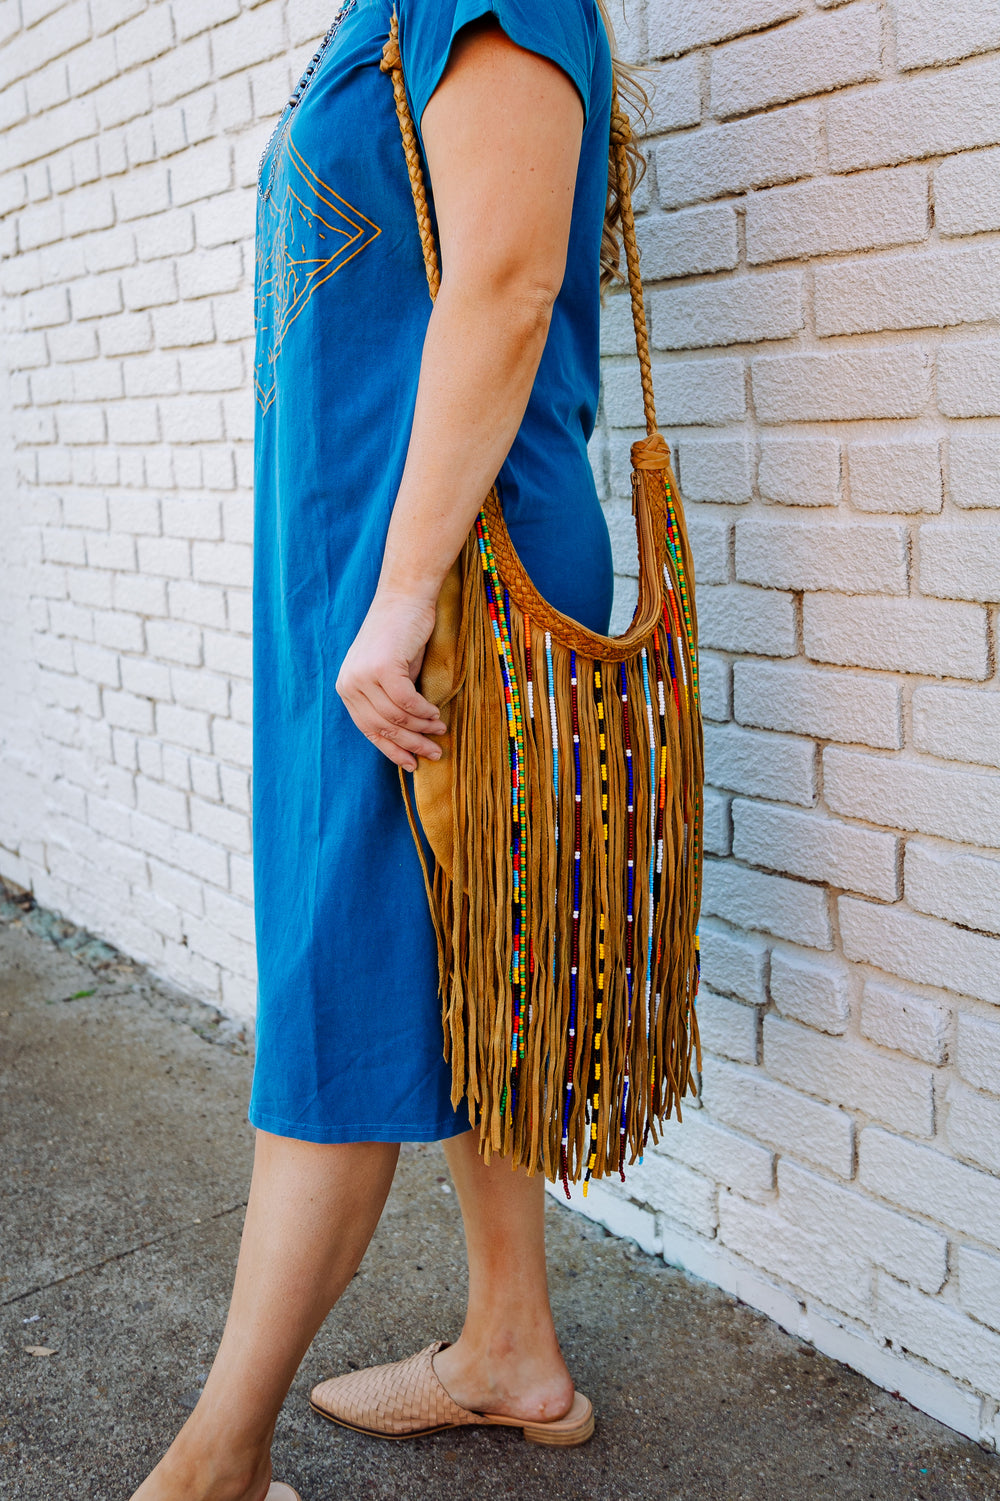 Tan Leather Purse with Fringe and Multi Color Beading